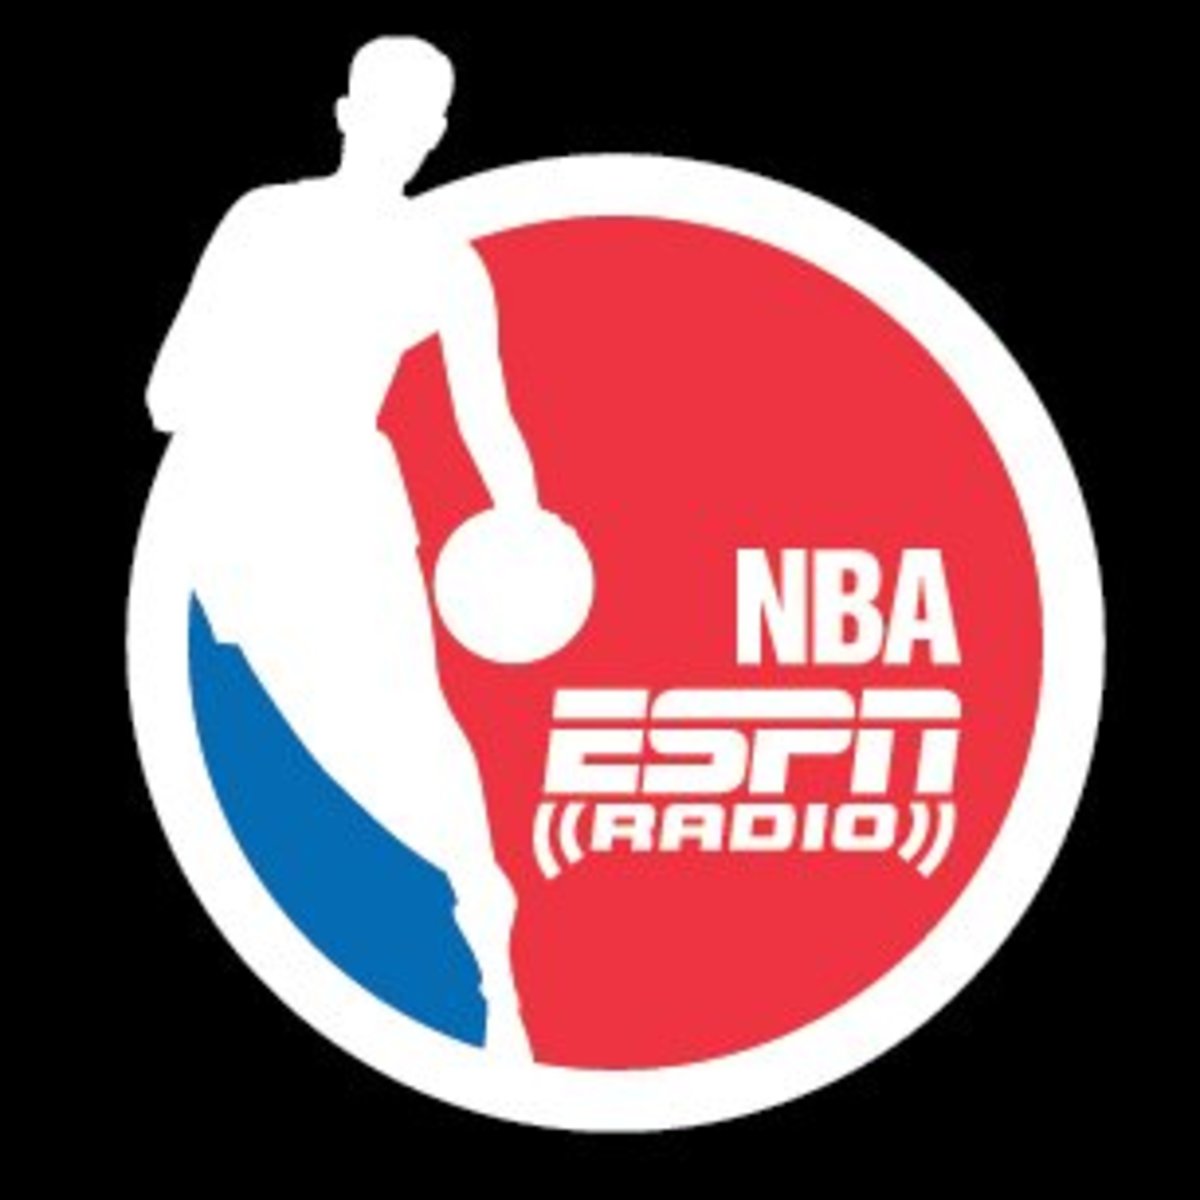 How to Listen to NBA Games on the Radio and Online: NBA on ESPN Radio